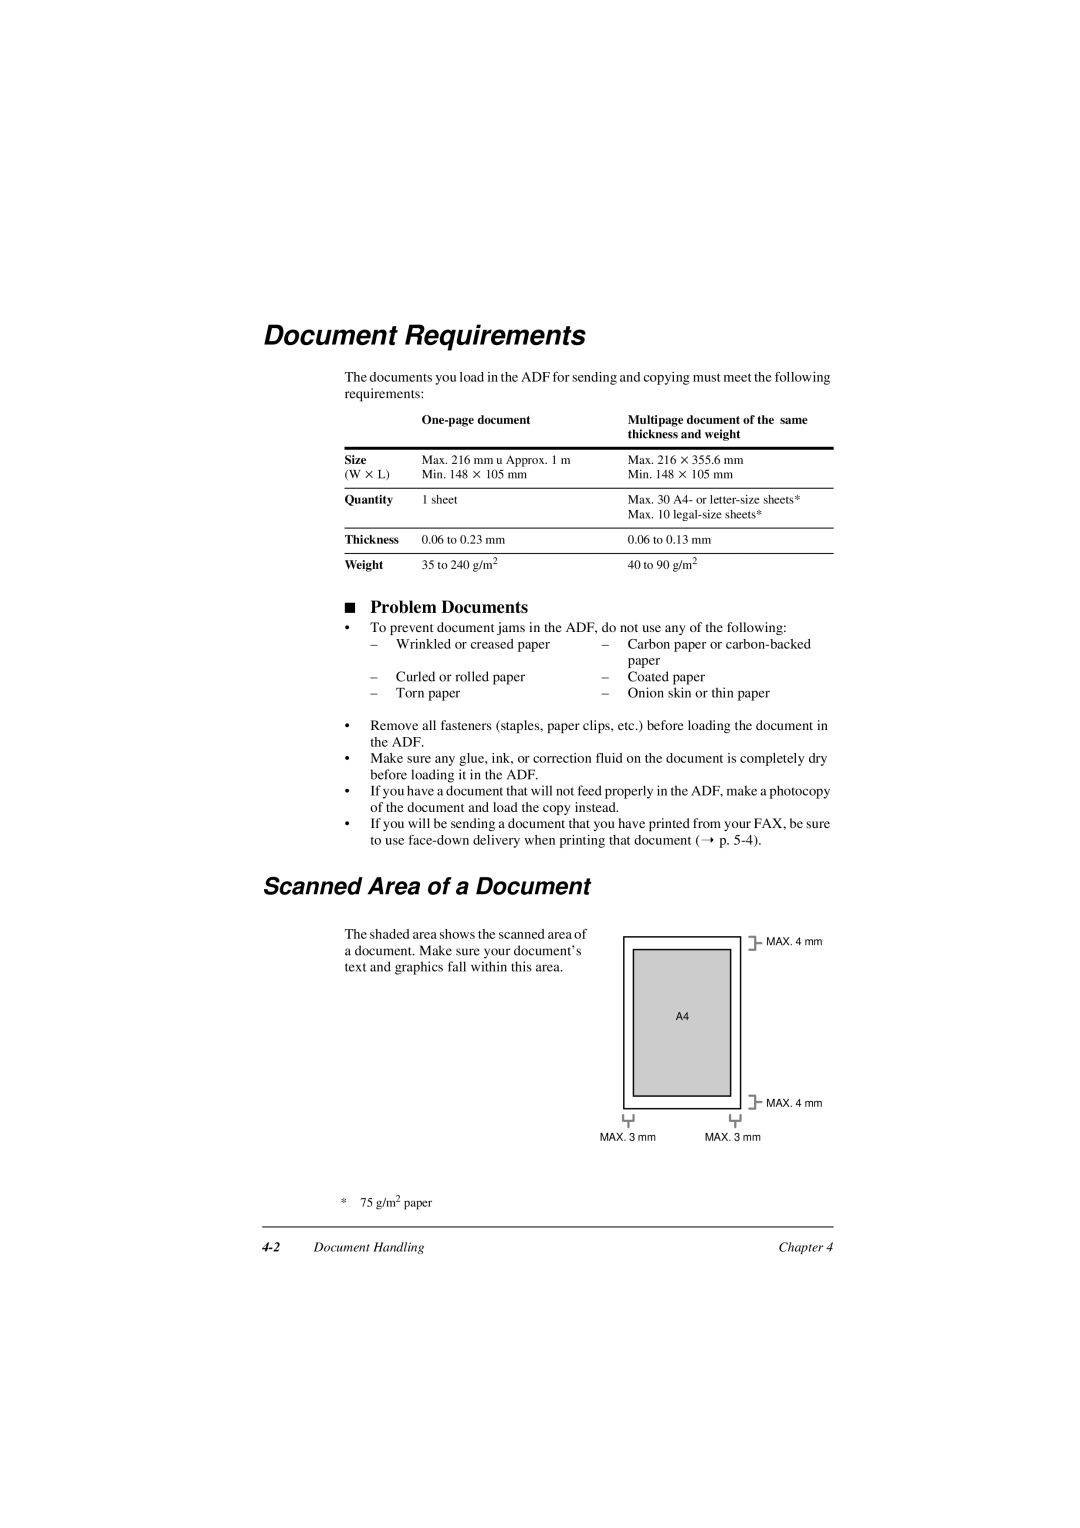 Canon L290, L240 manual Document Requirements, Scanned Area of a Document, Problem Documents 